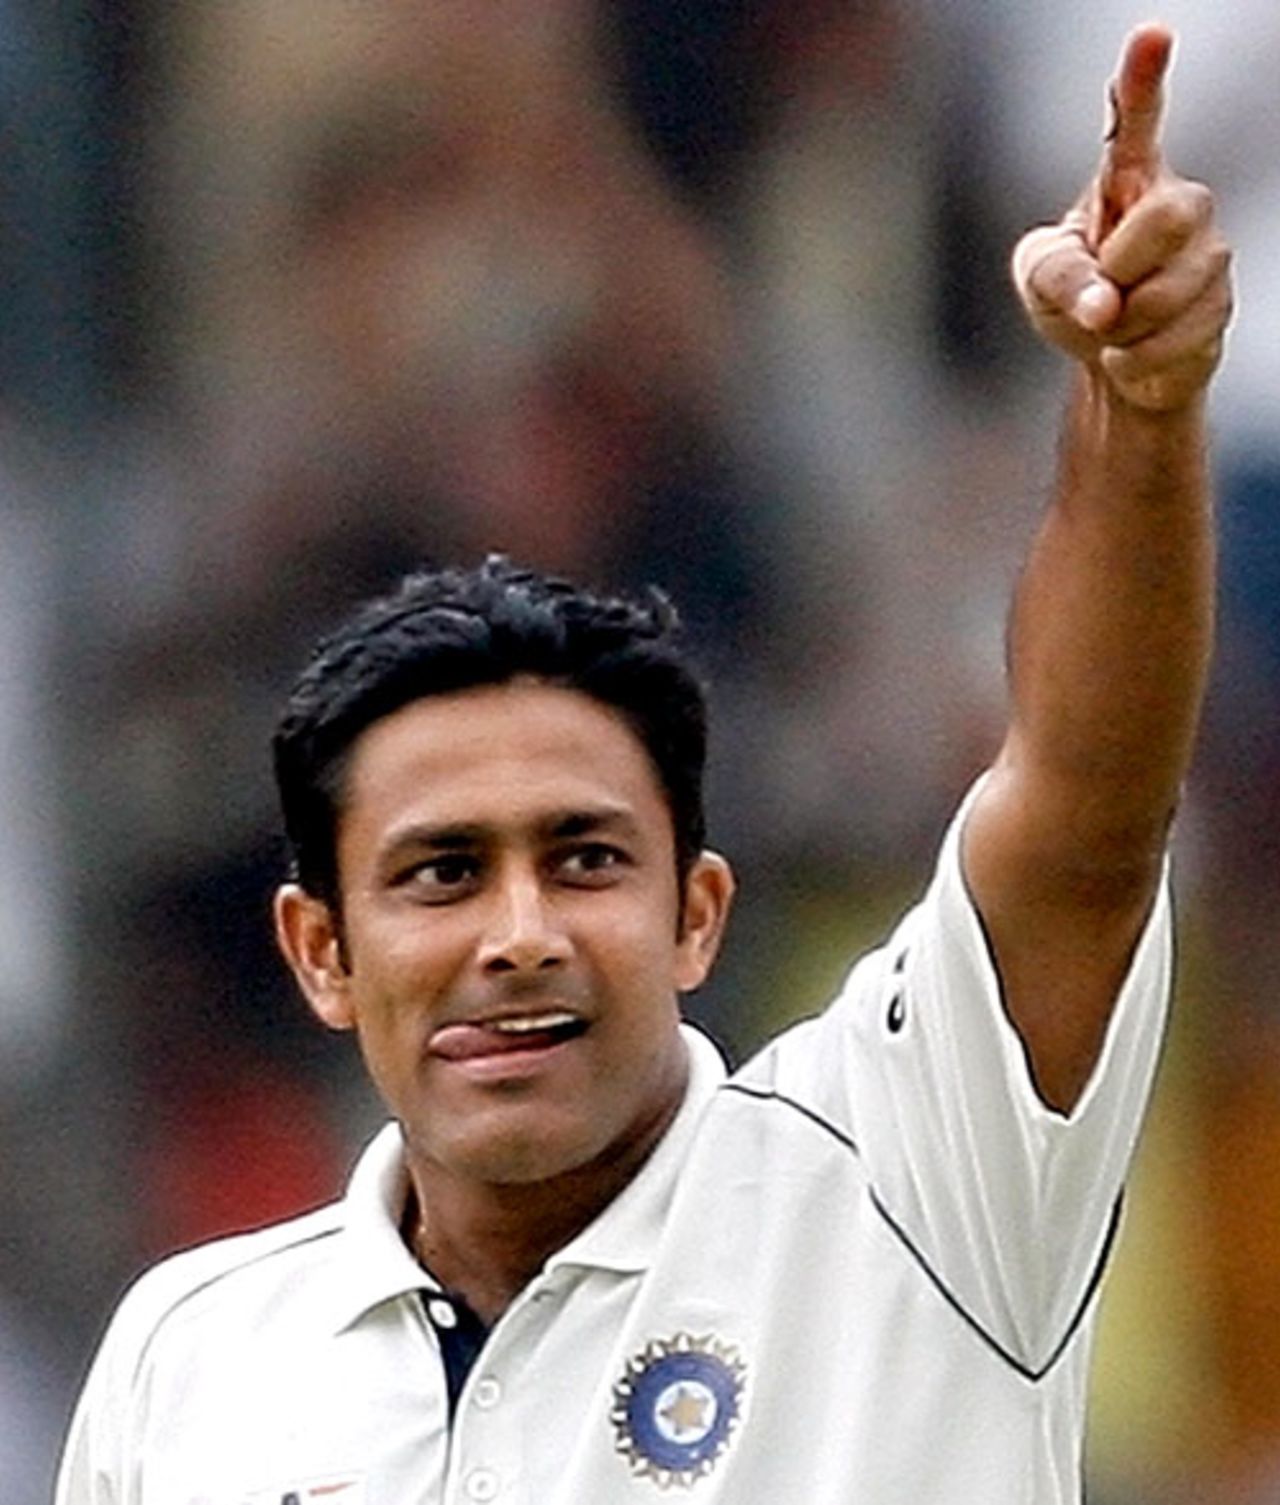 Anil Kumble celebrates after dismissing Younis Khan, India v Pakistan, 3rd Test, Bangalore, 5th day, December 12, 2007 

